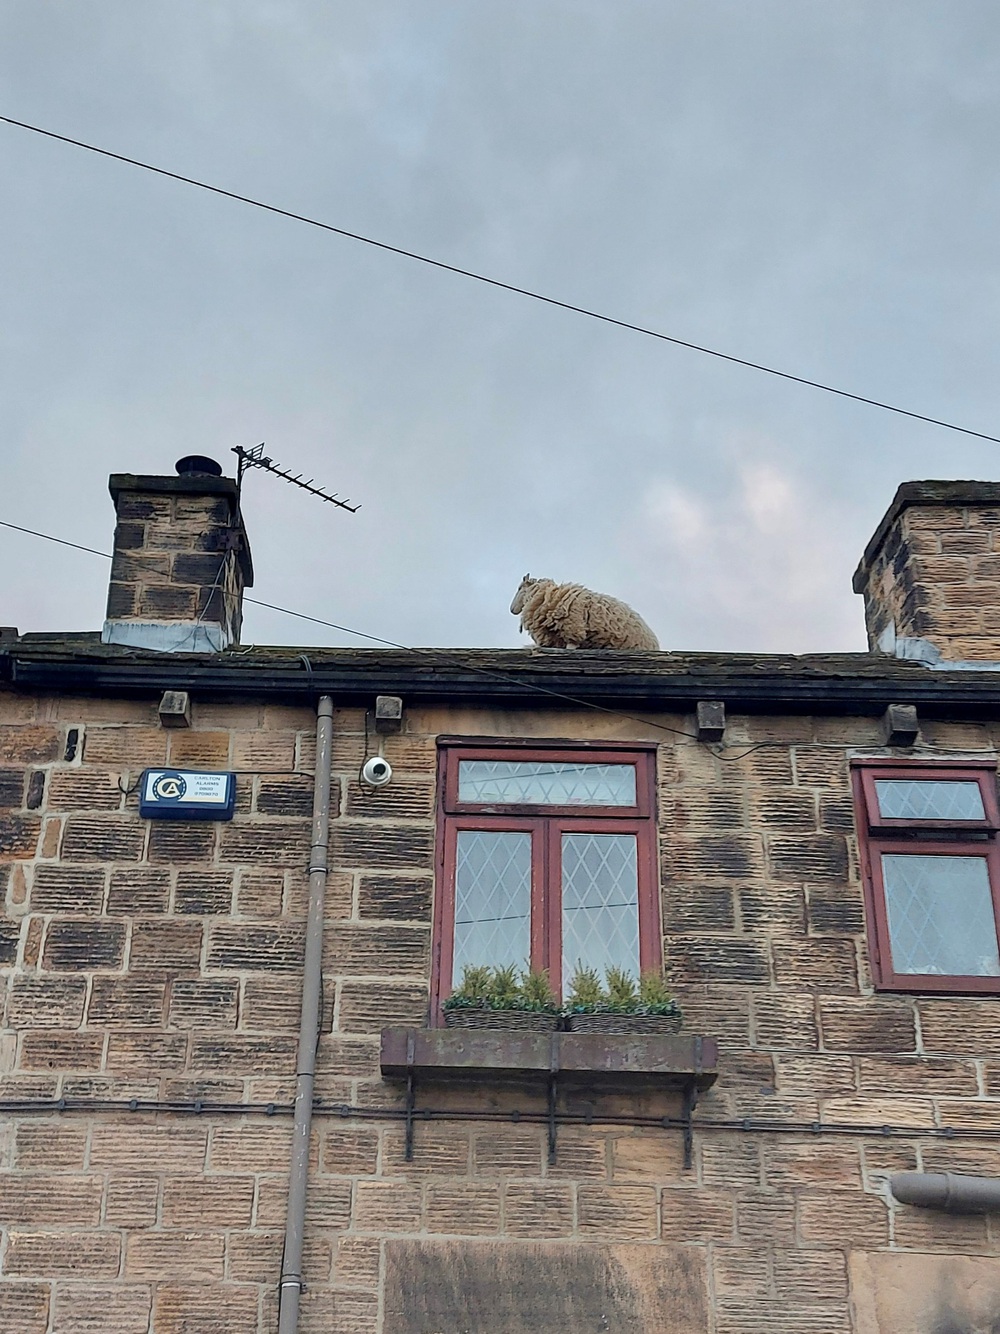 Rescue sheep stuck on the roof in England - Photo 3.